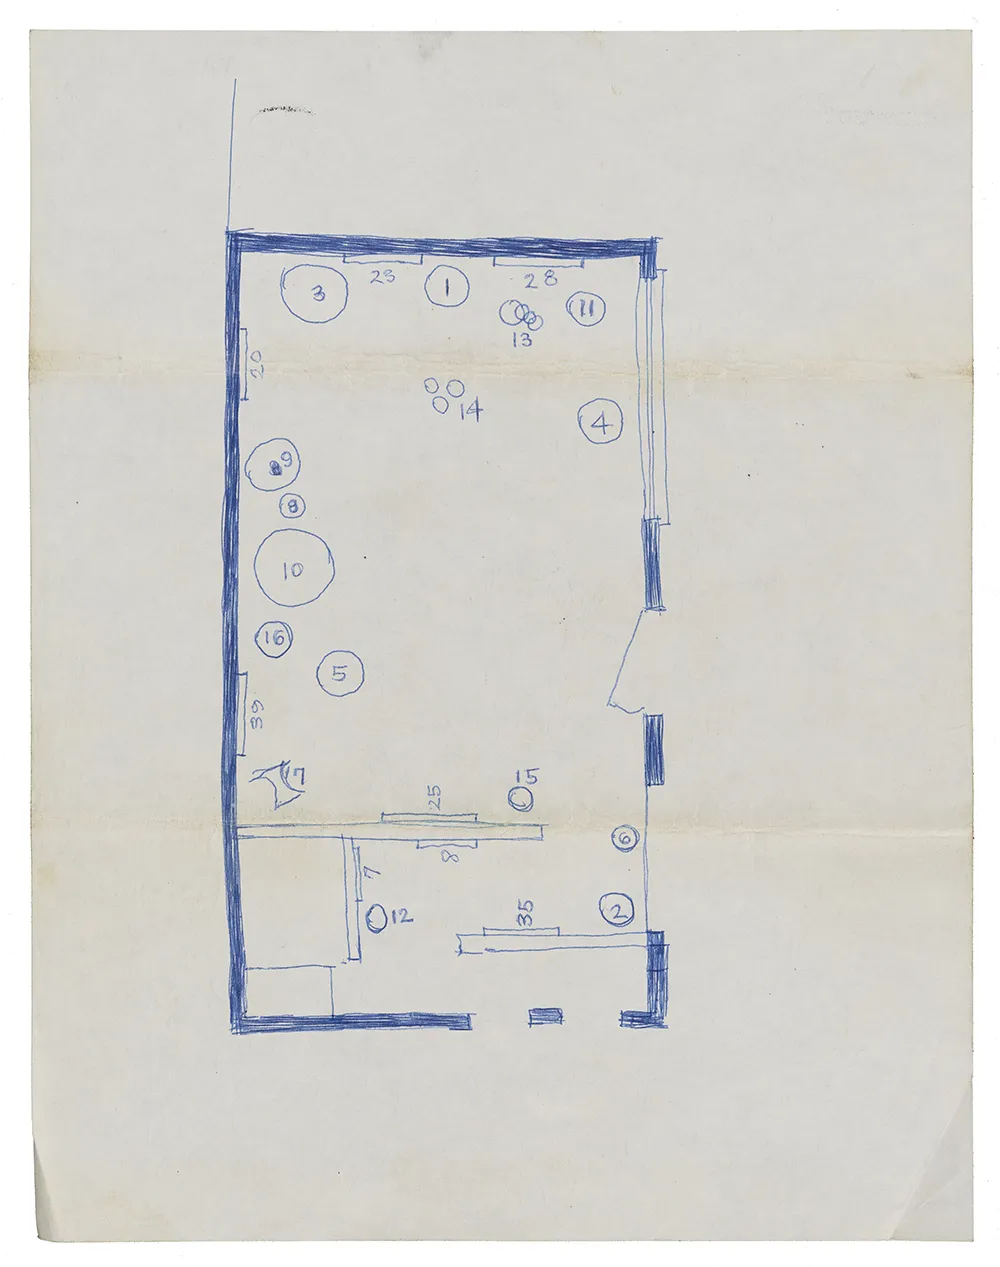 Exhibition plan for a gallery space in blue ink with numbers indicating where the sculptures will be installed.